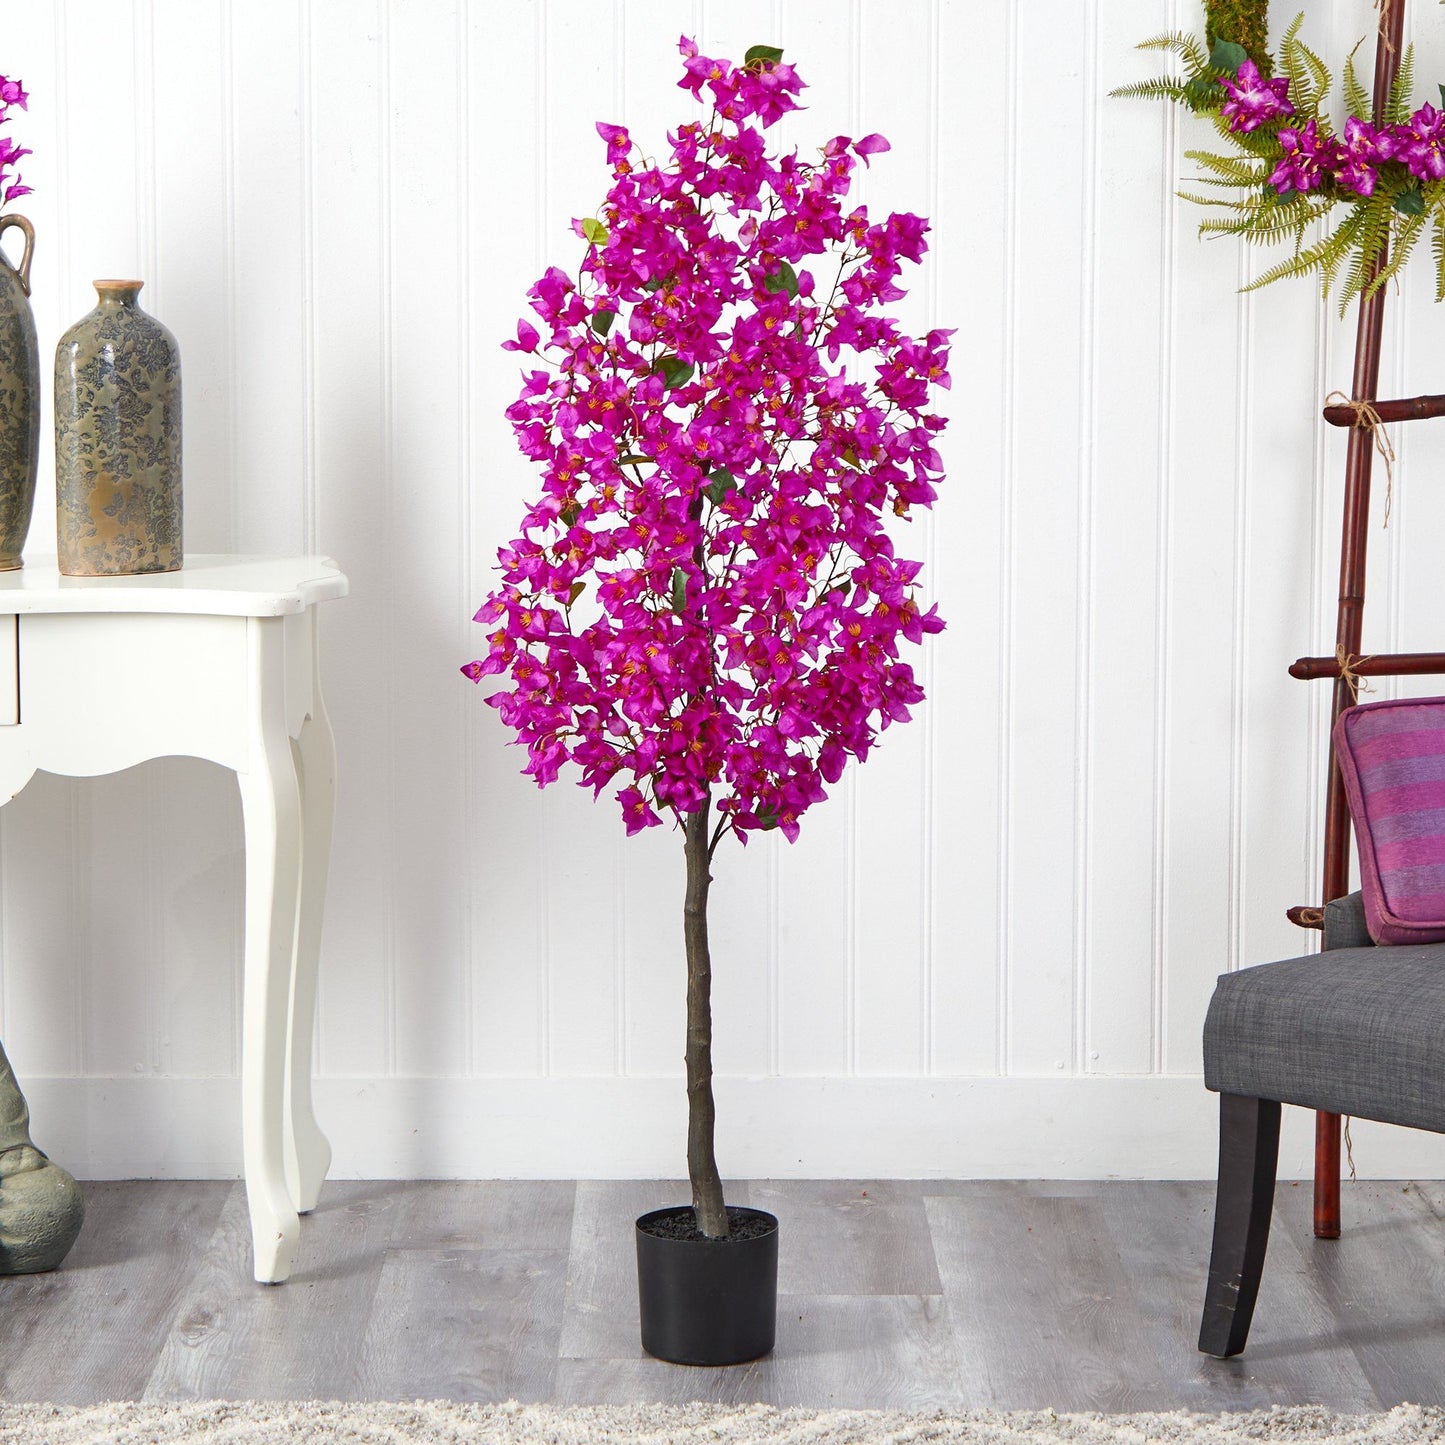 5’ Bougainvillea Artificial Tree by Nearly Natural